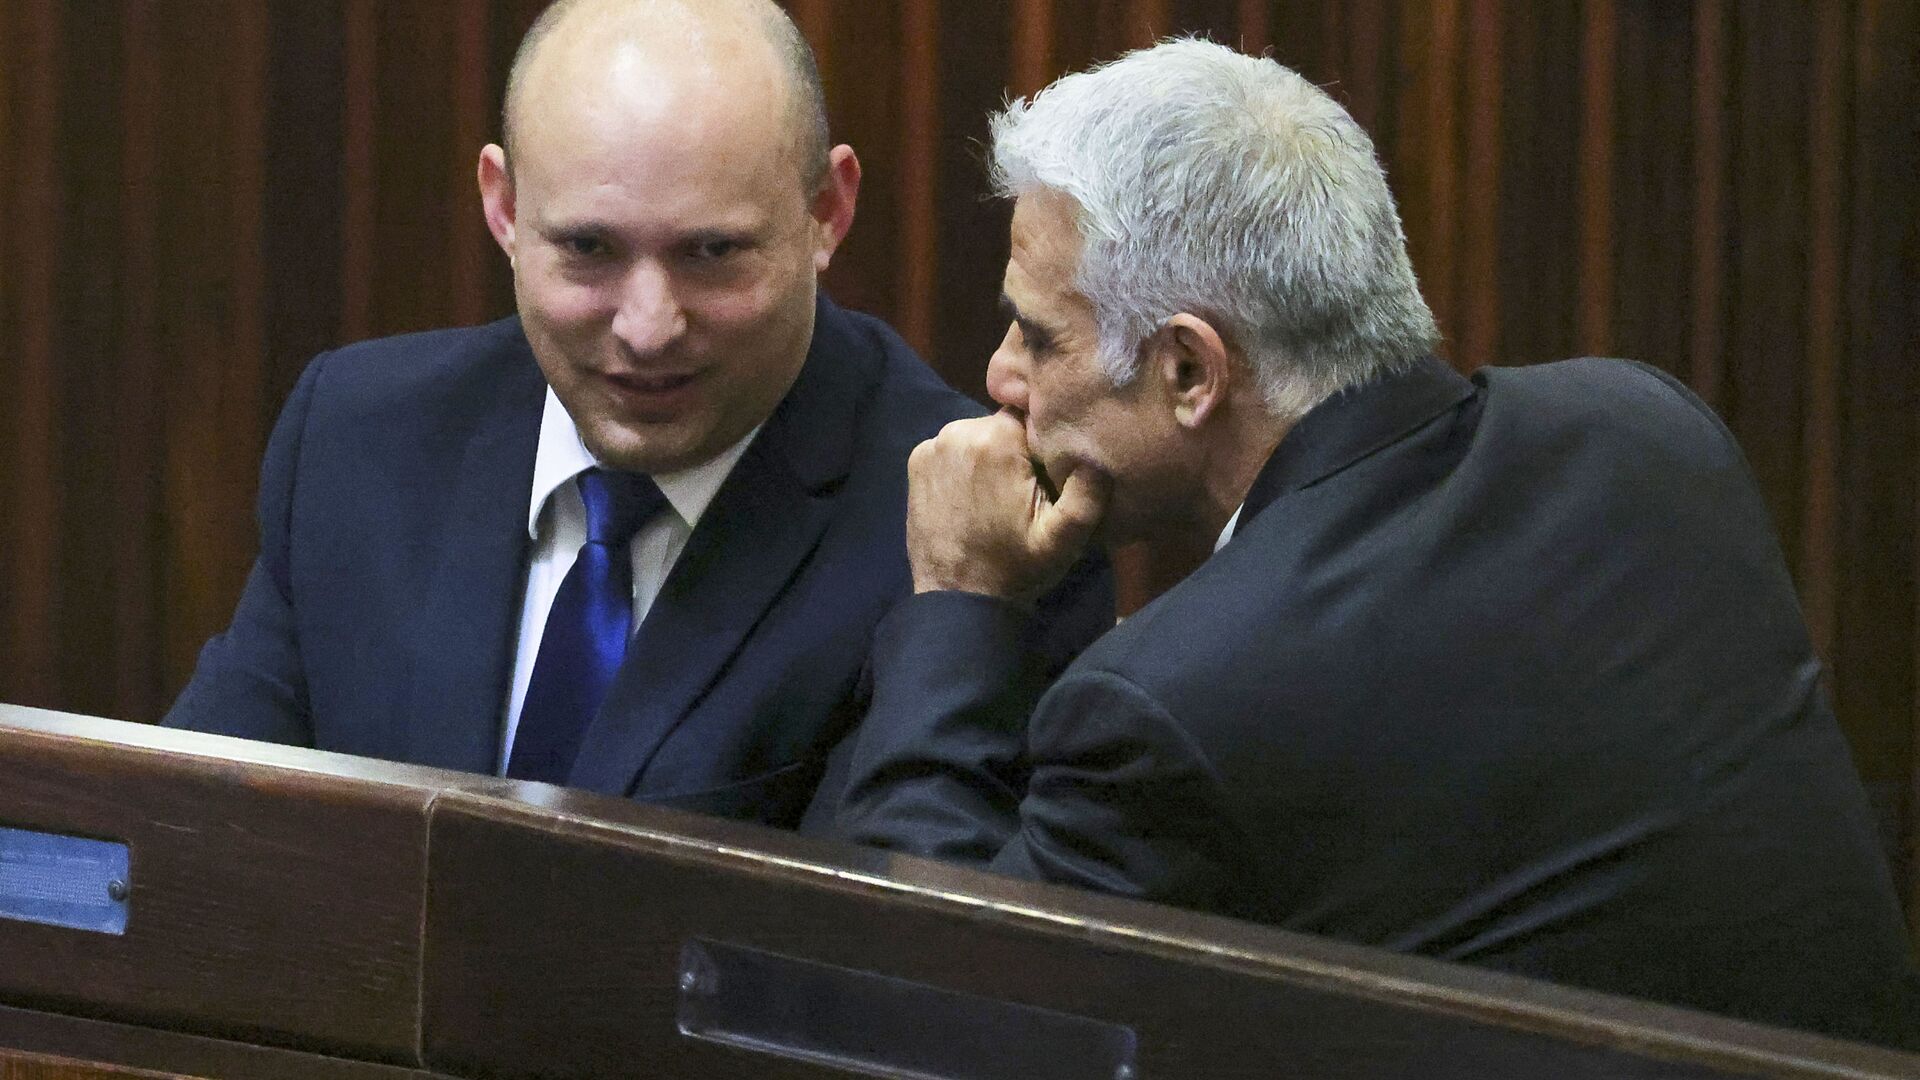 Naftali Bennett (L), smiles as he speaks to Yesh Atid party leader, Yair Lapid, during a special session of the Knesset, Israel's parliament, to elect a new president, in Jerusalem on June 2, 2021. - Sputnik International, 1920, 17.06.2021